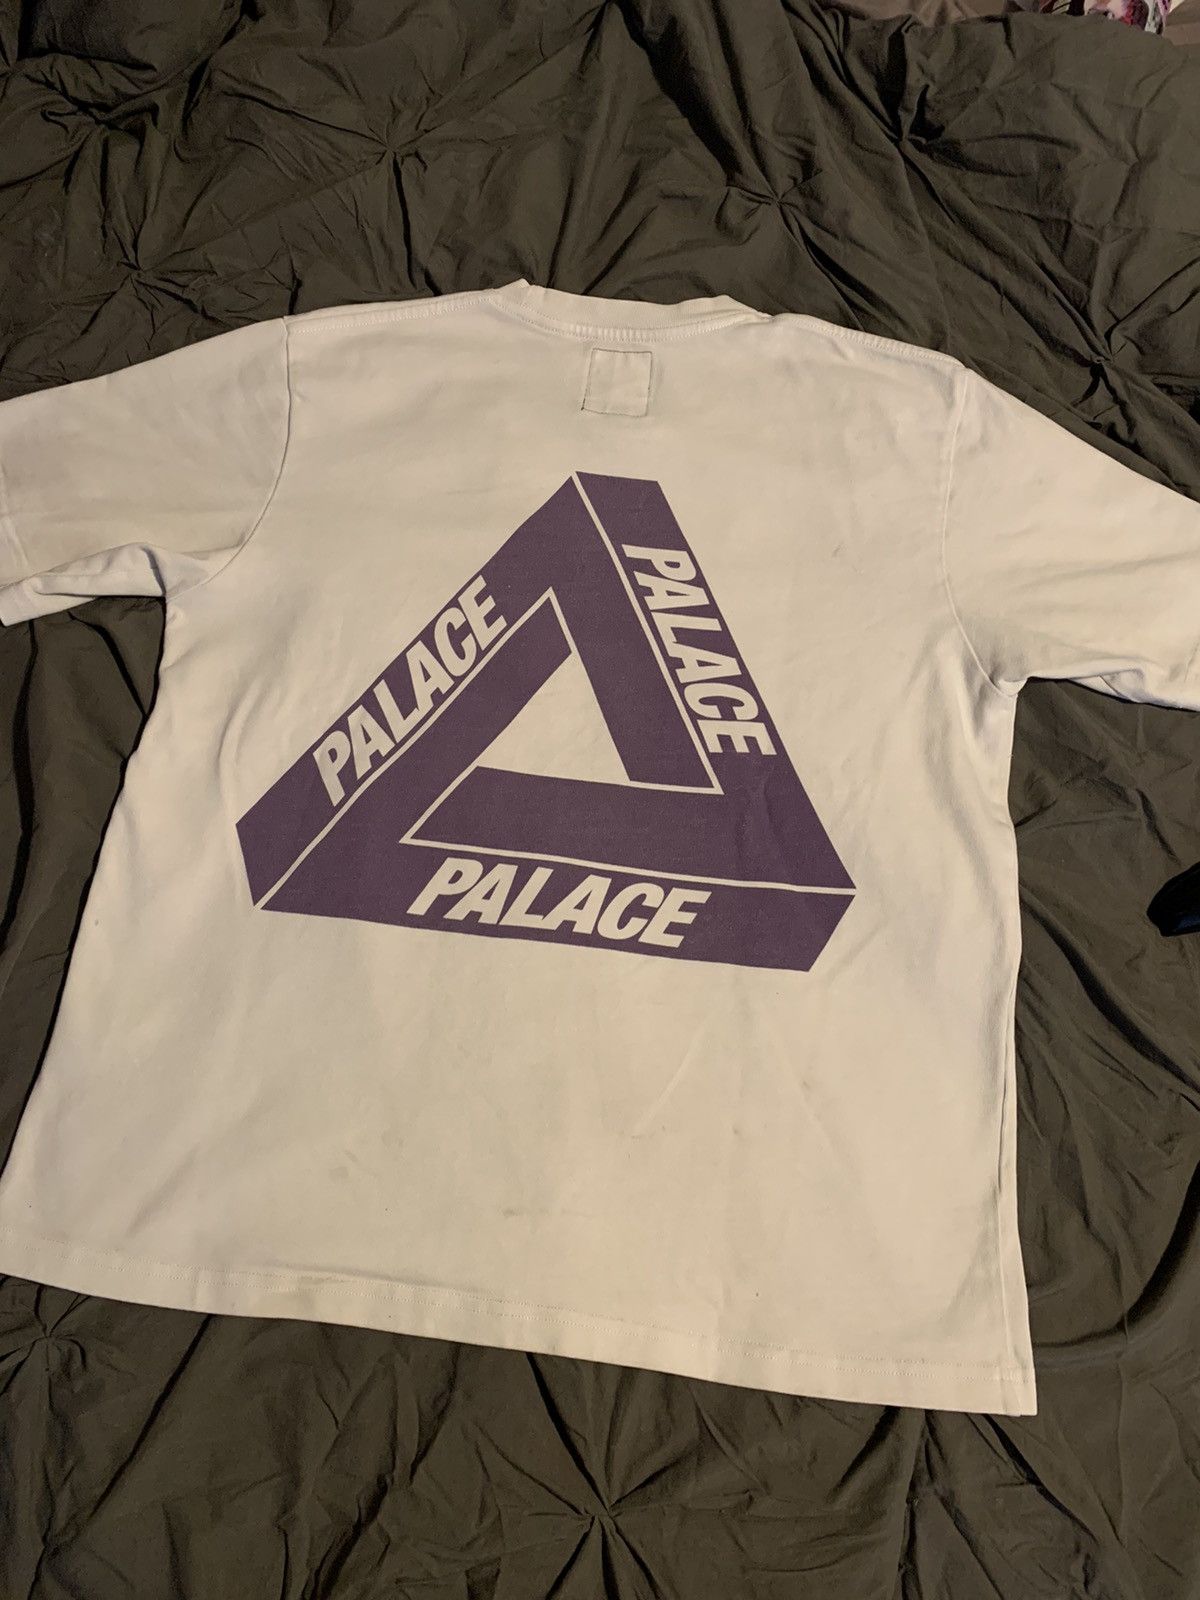 Palace North Face | Grailed